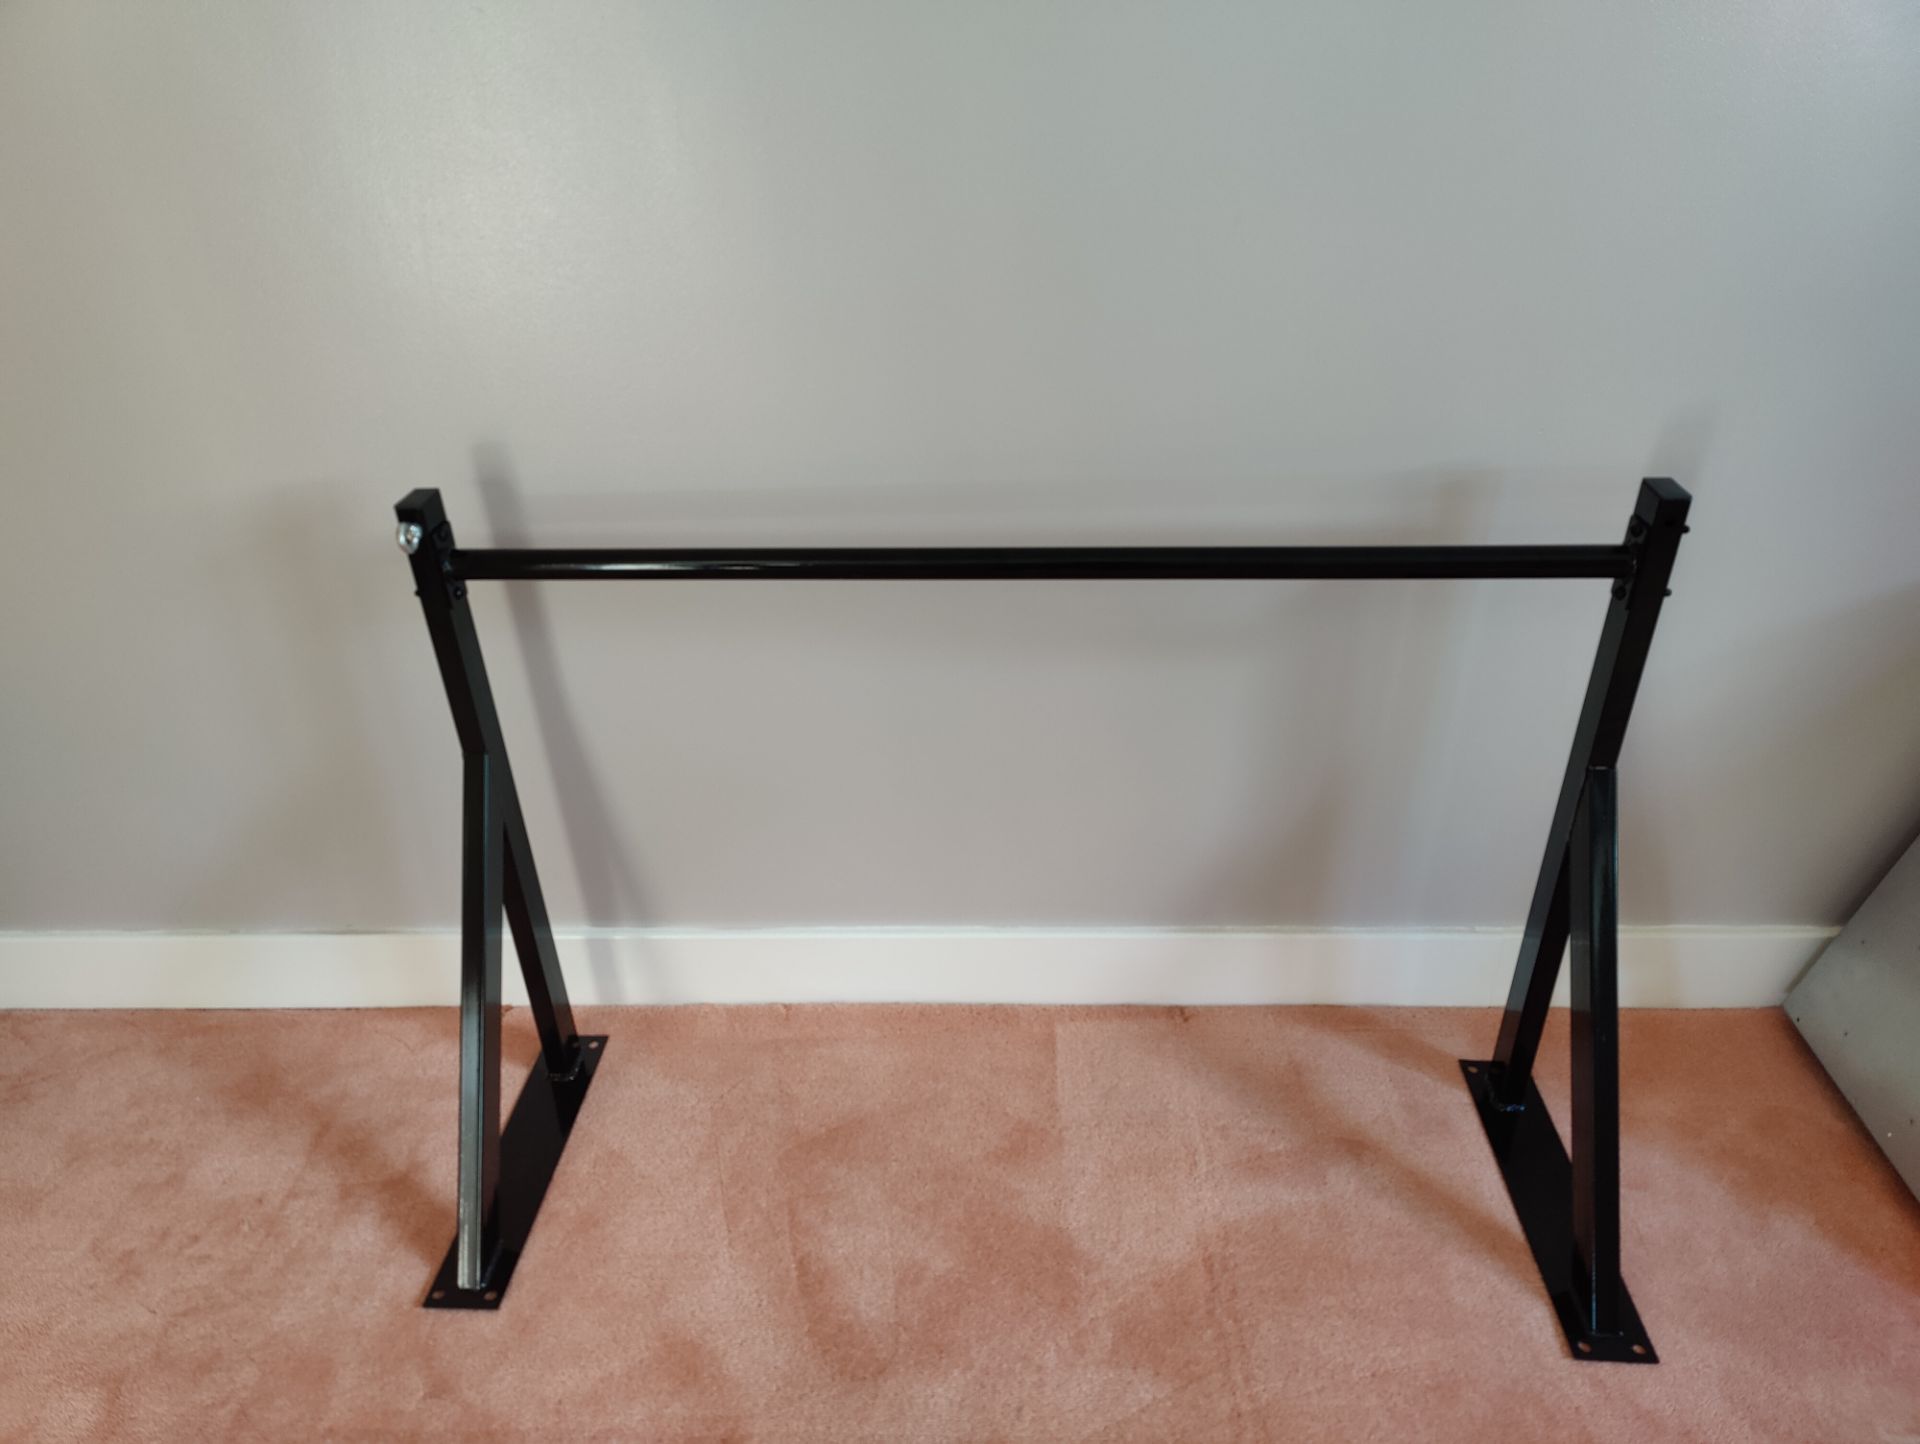 Commercial Gym Wall Mounted Steel Made Pull/Push Chin Up Bar - Bild 2 aus 3